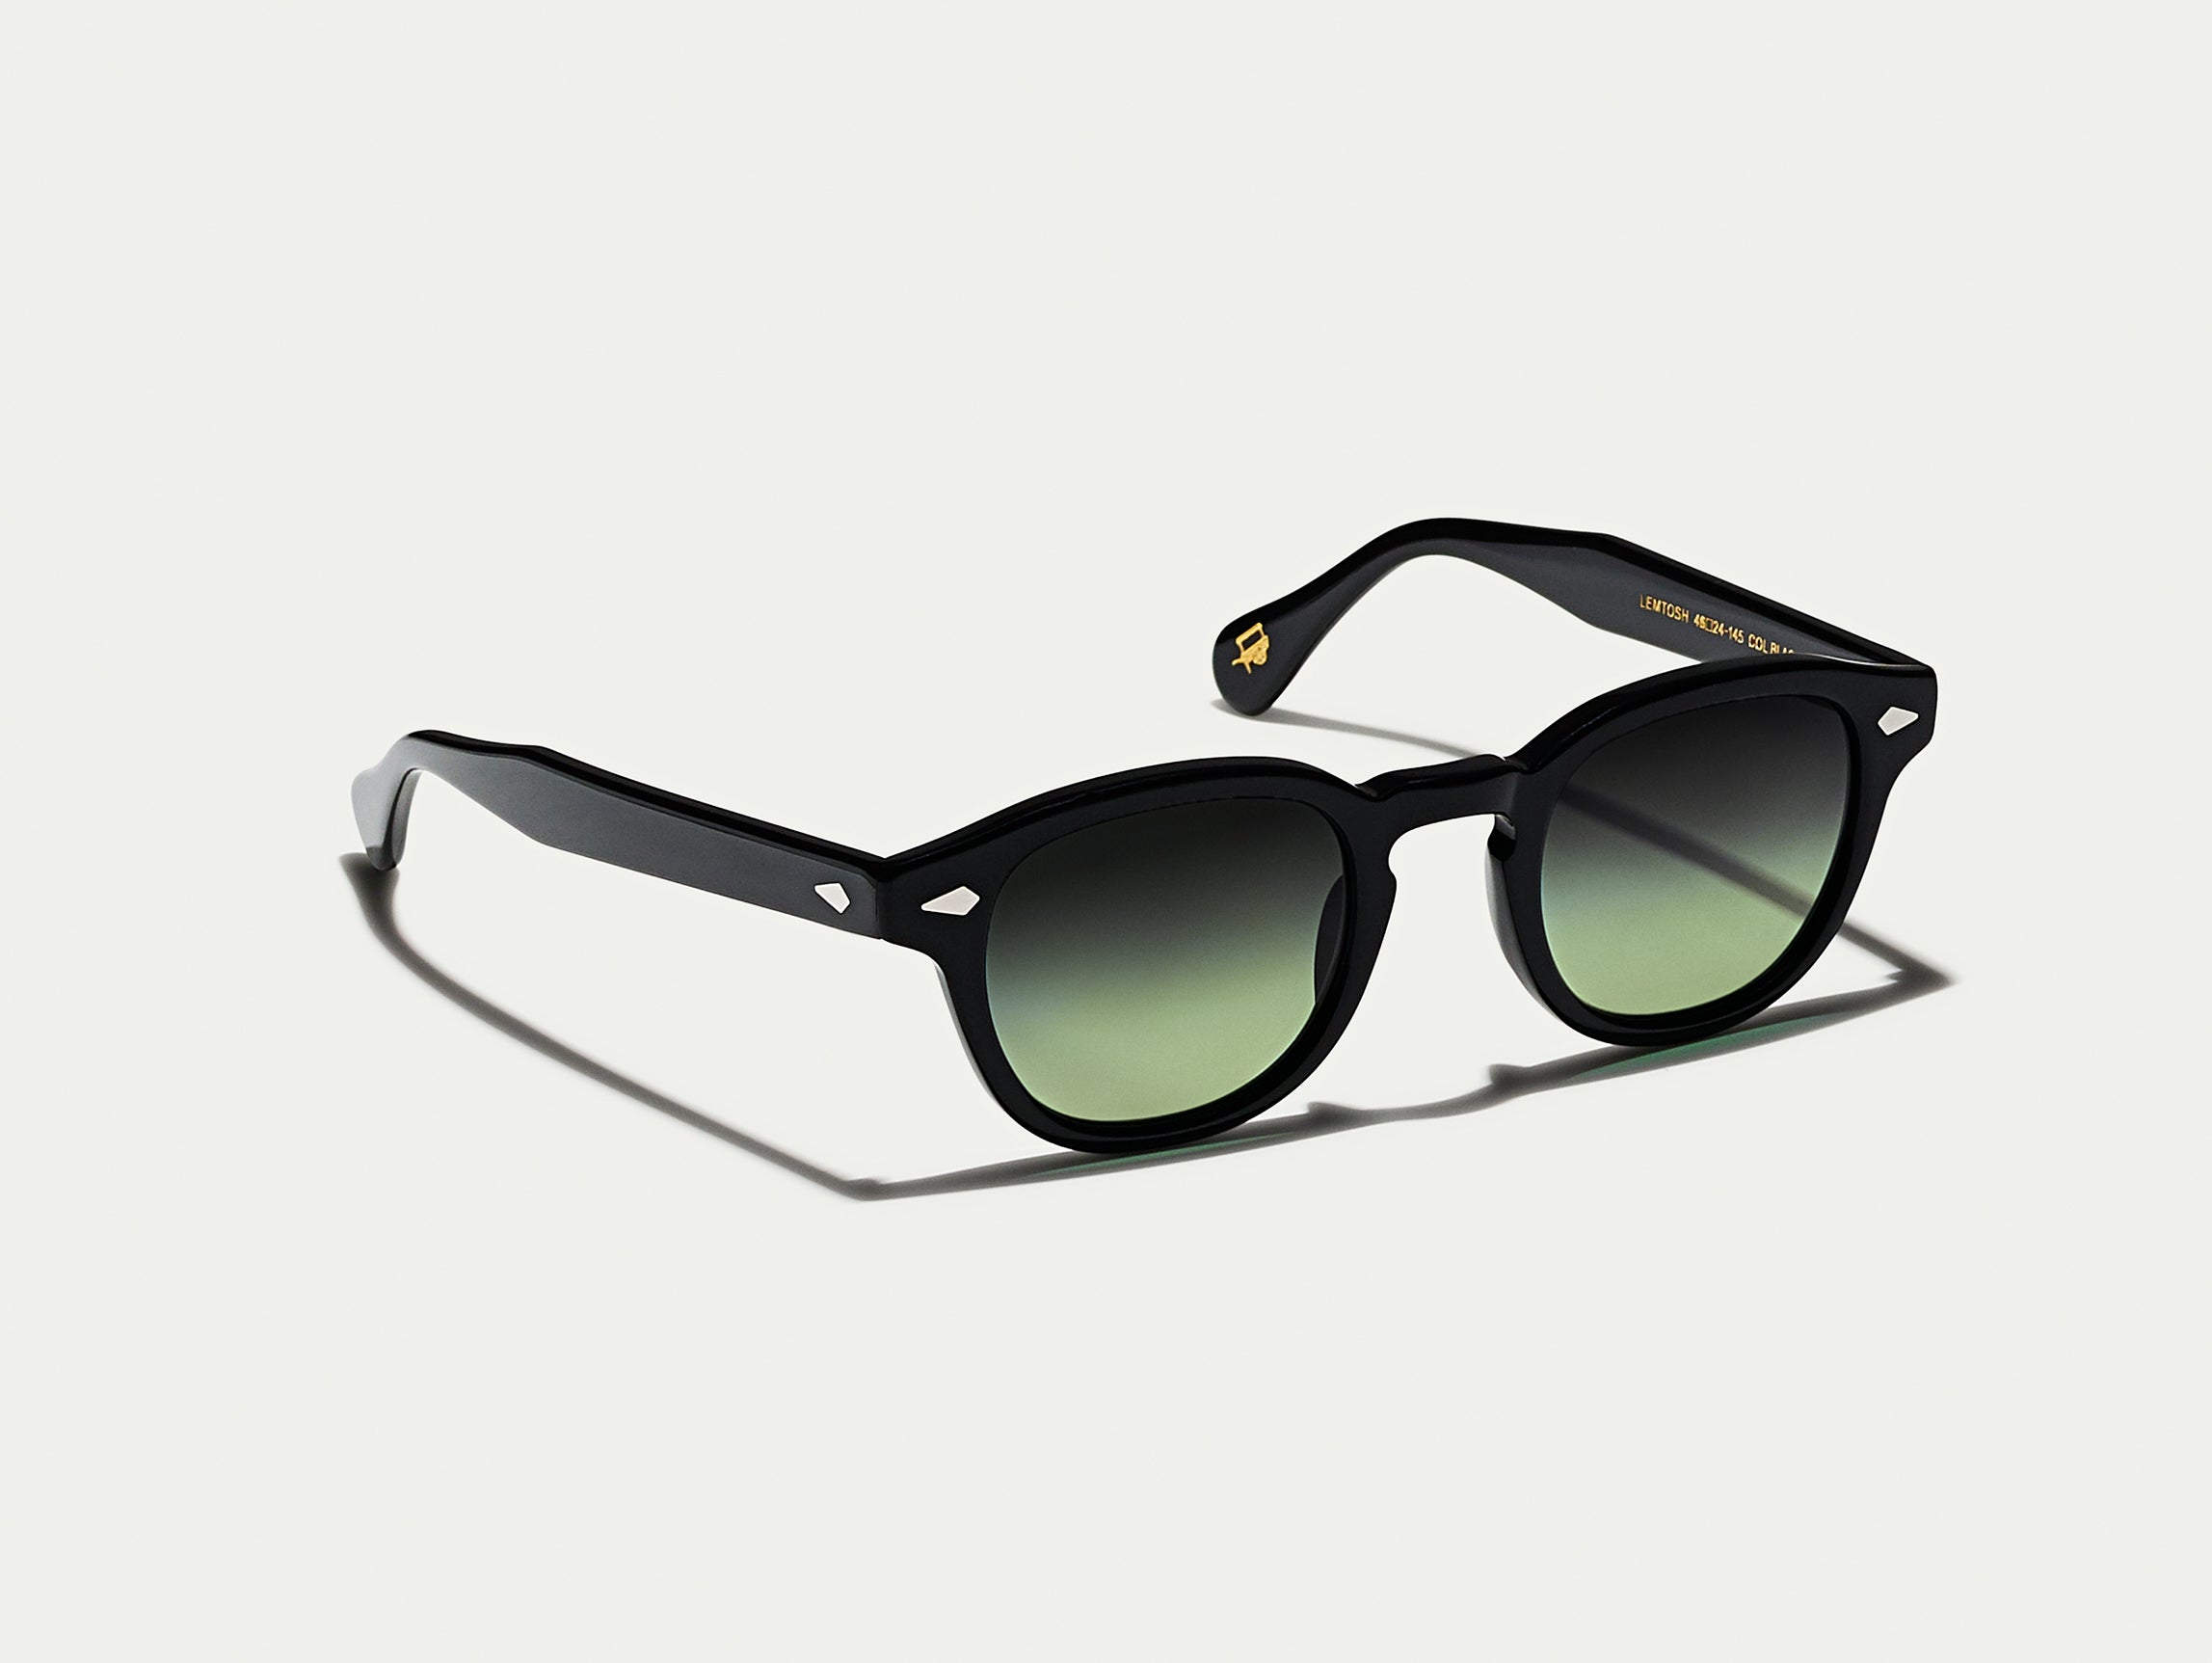 #color_forest wood | The LEMTOSH Black with Forest Wood Tinted Lenses